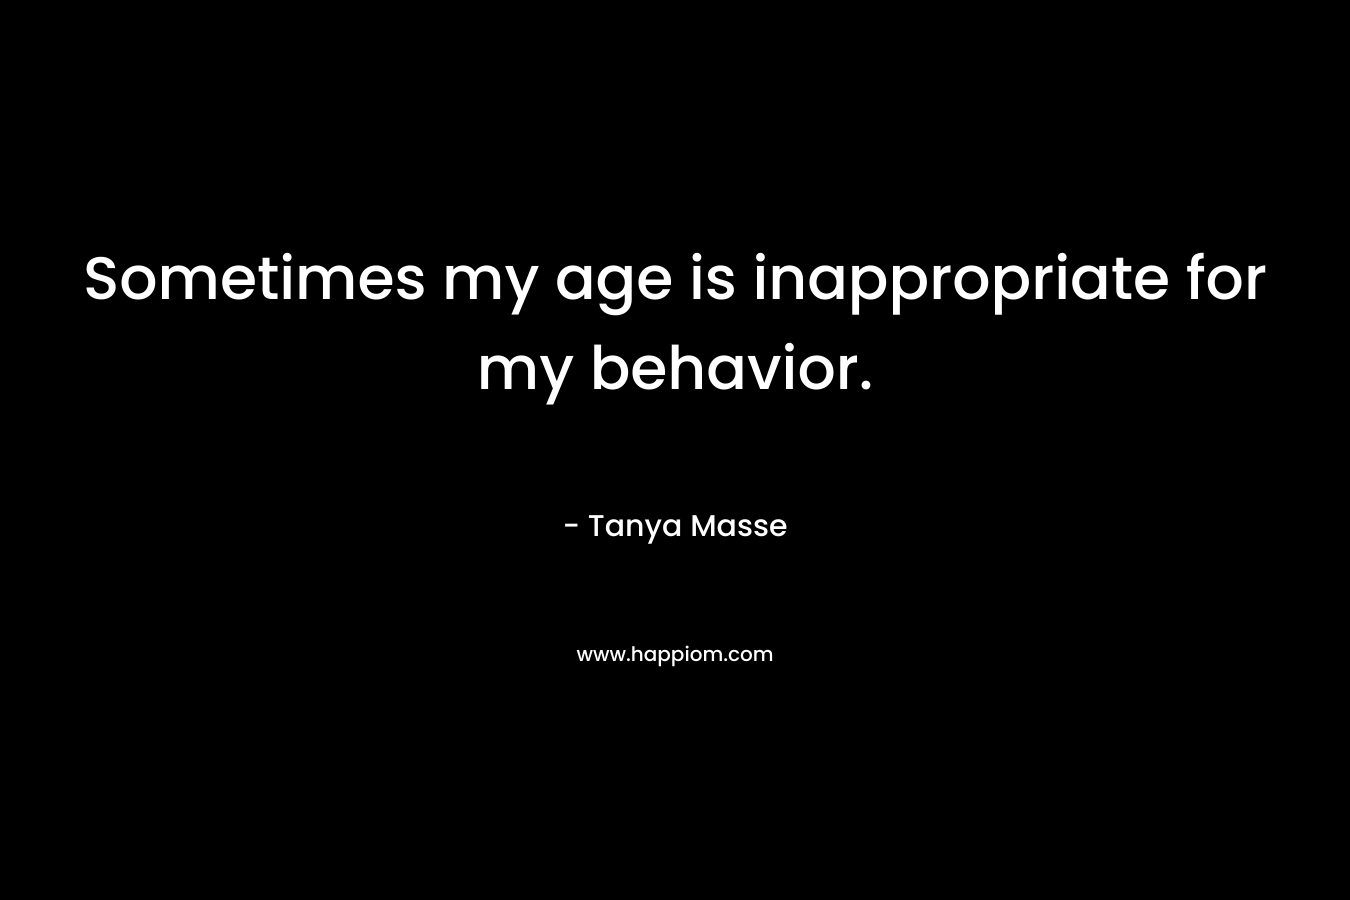 Sometimes my age is inappropriate for my behavior.